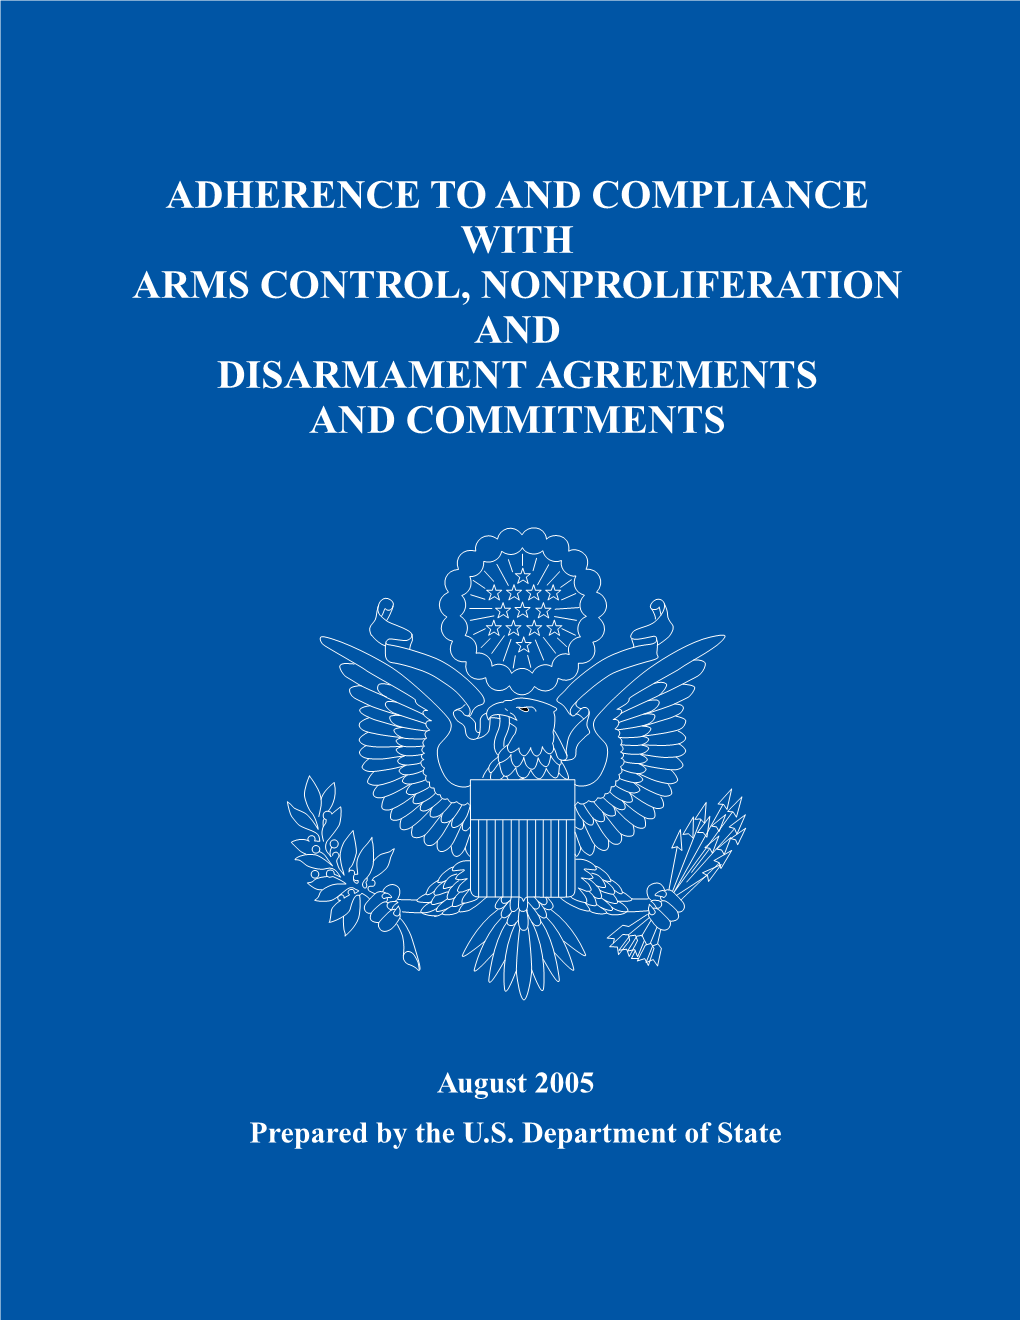 Adherence to and Compliance with Arms Control, Nonproliferation and Disarmament Agreements and Commitments